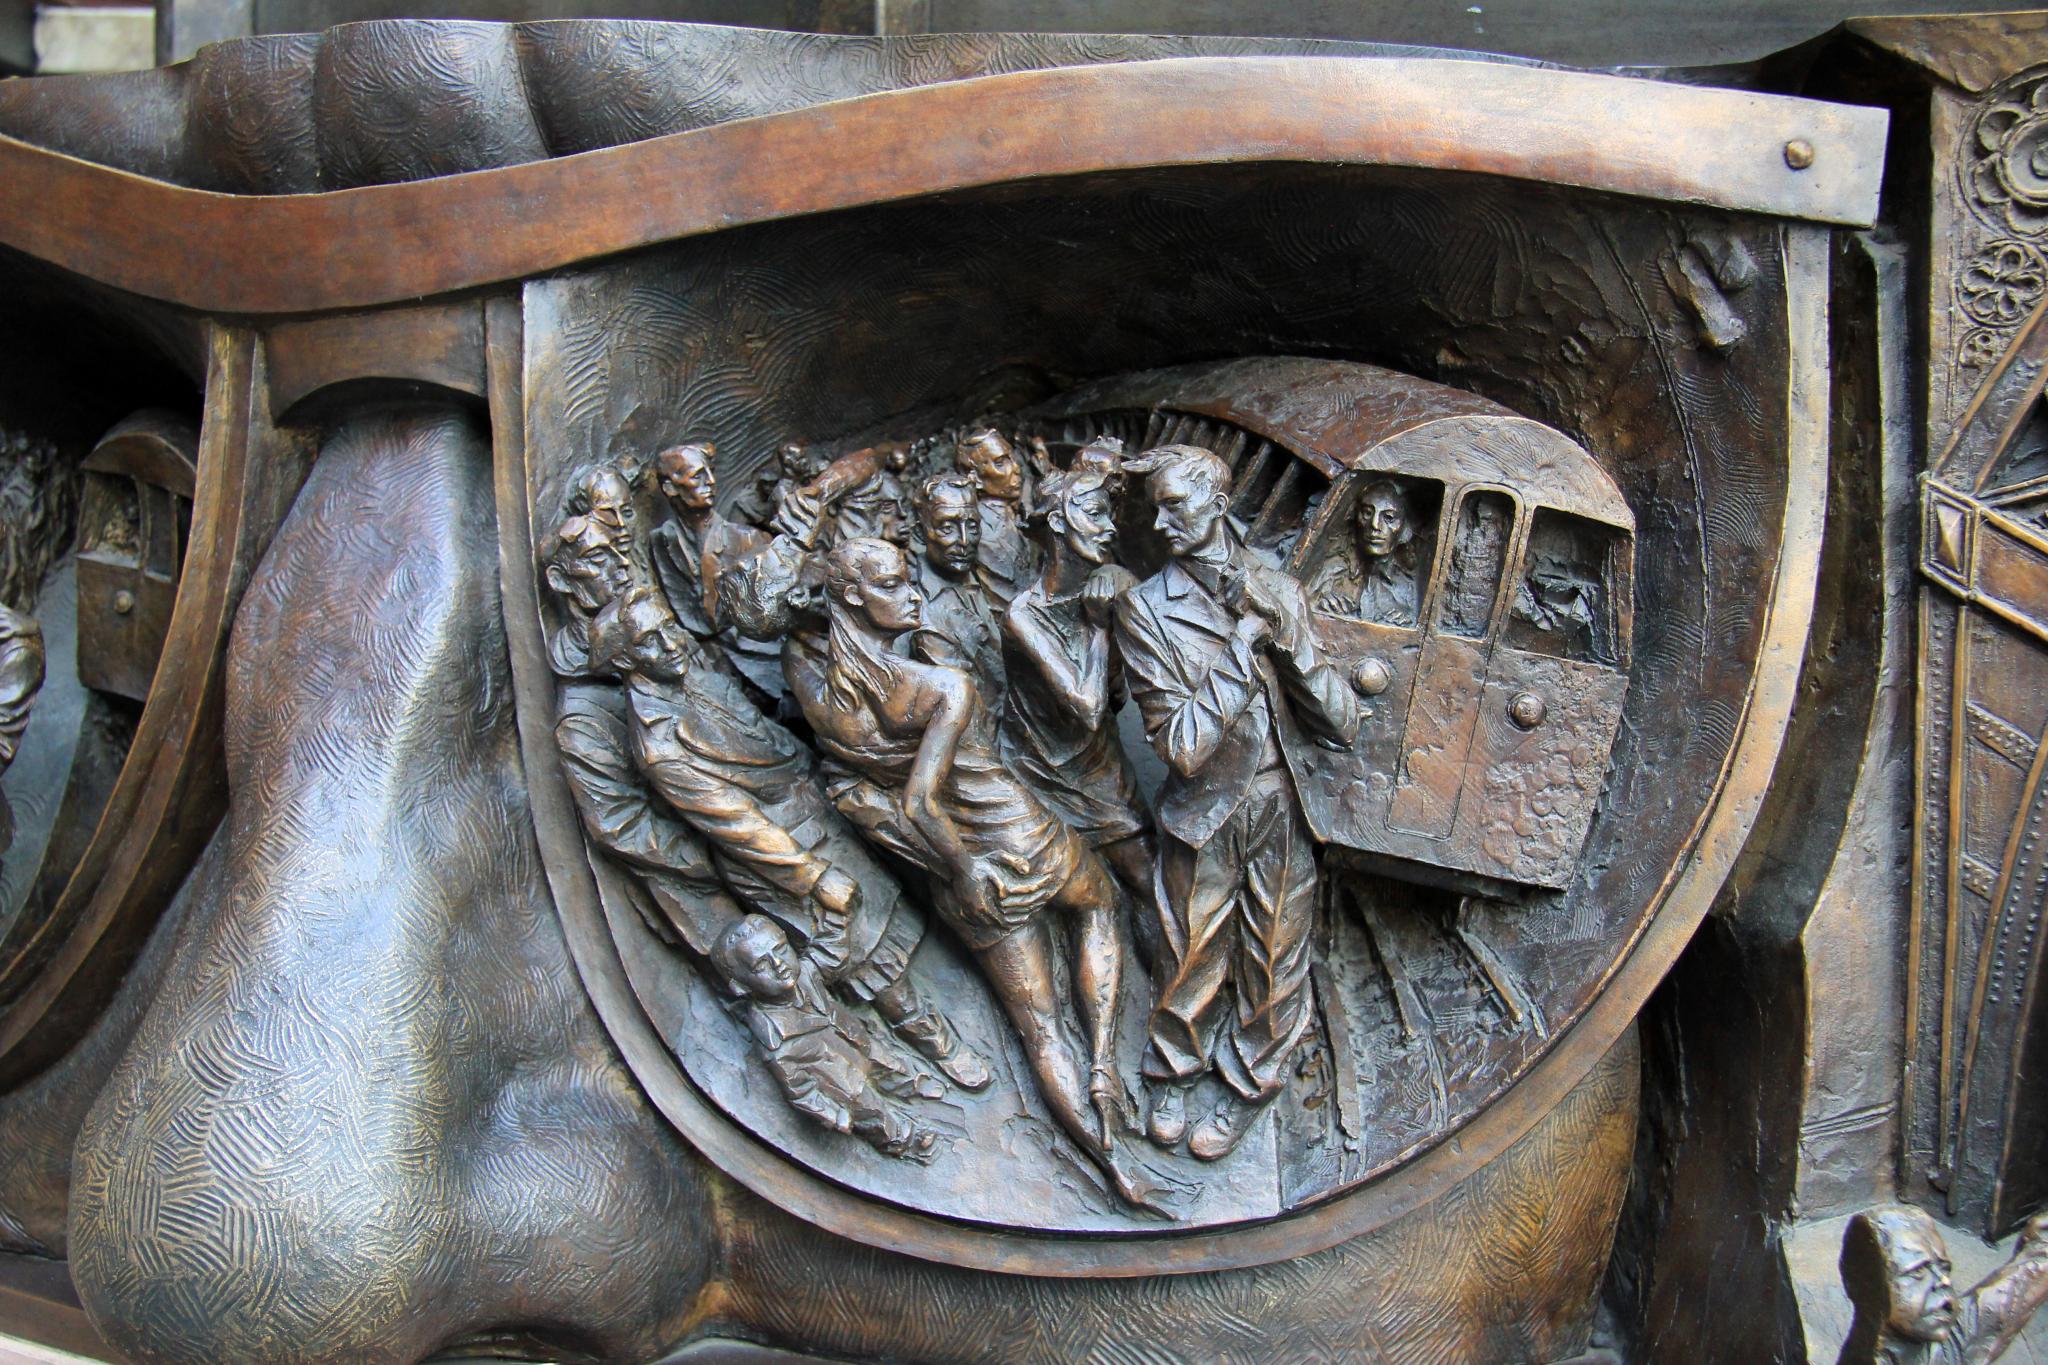 a monument is made of bronze metal, featuring men carrying carts